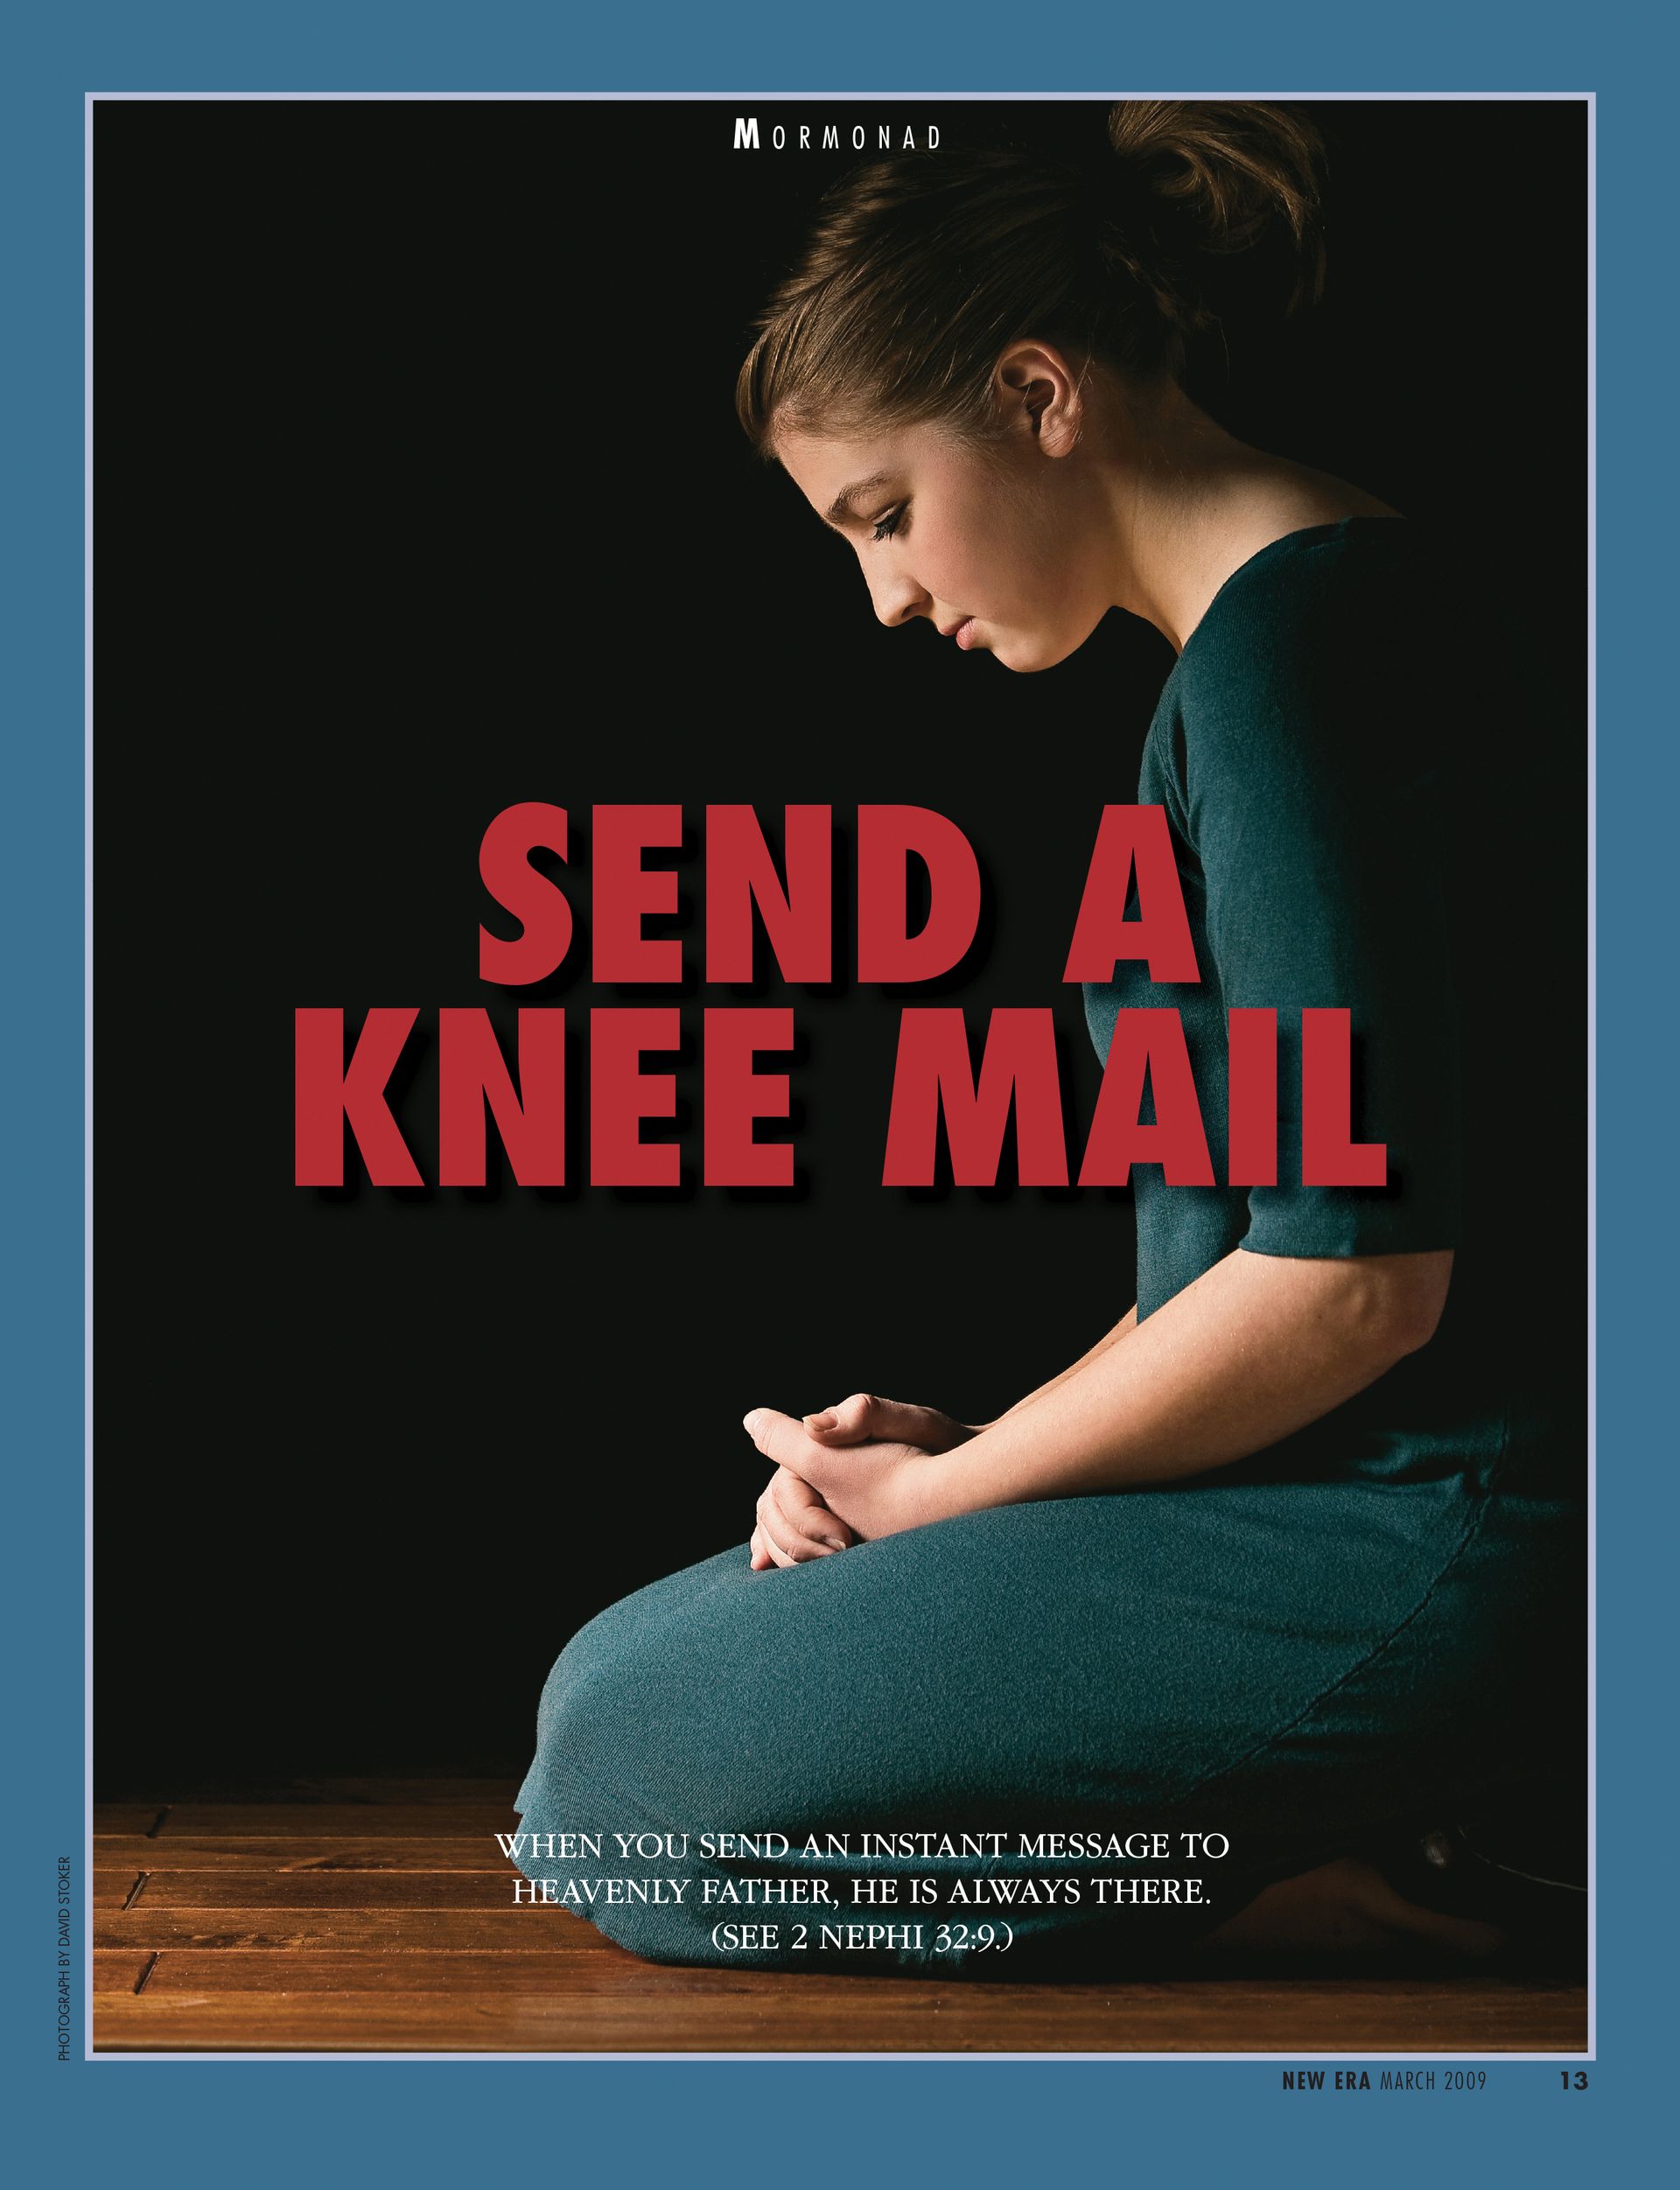 Send a Knee Mail. When you send an instant message to Heavenly Father, He is always there. (See 2 Nephi 32:9.) Mar. 2009 © undefined ipCode 1.